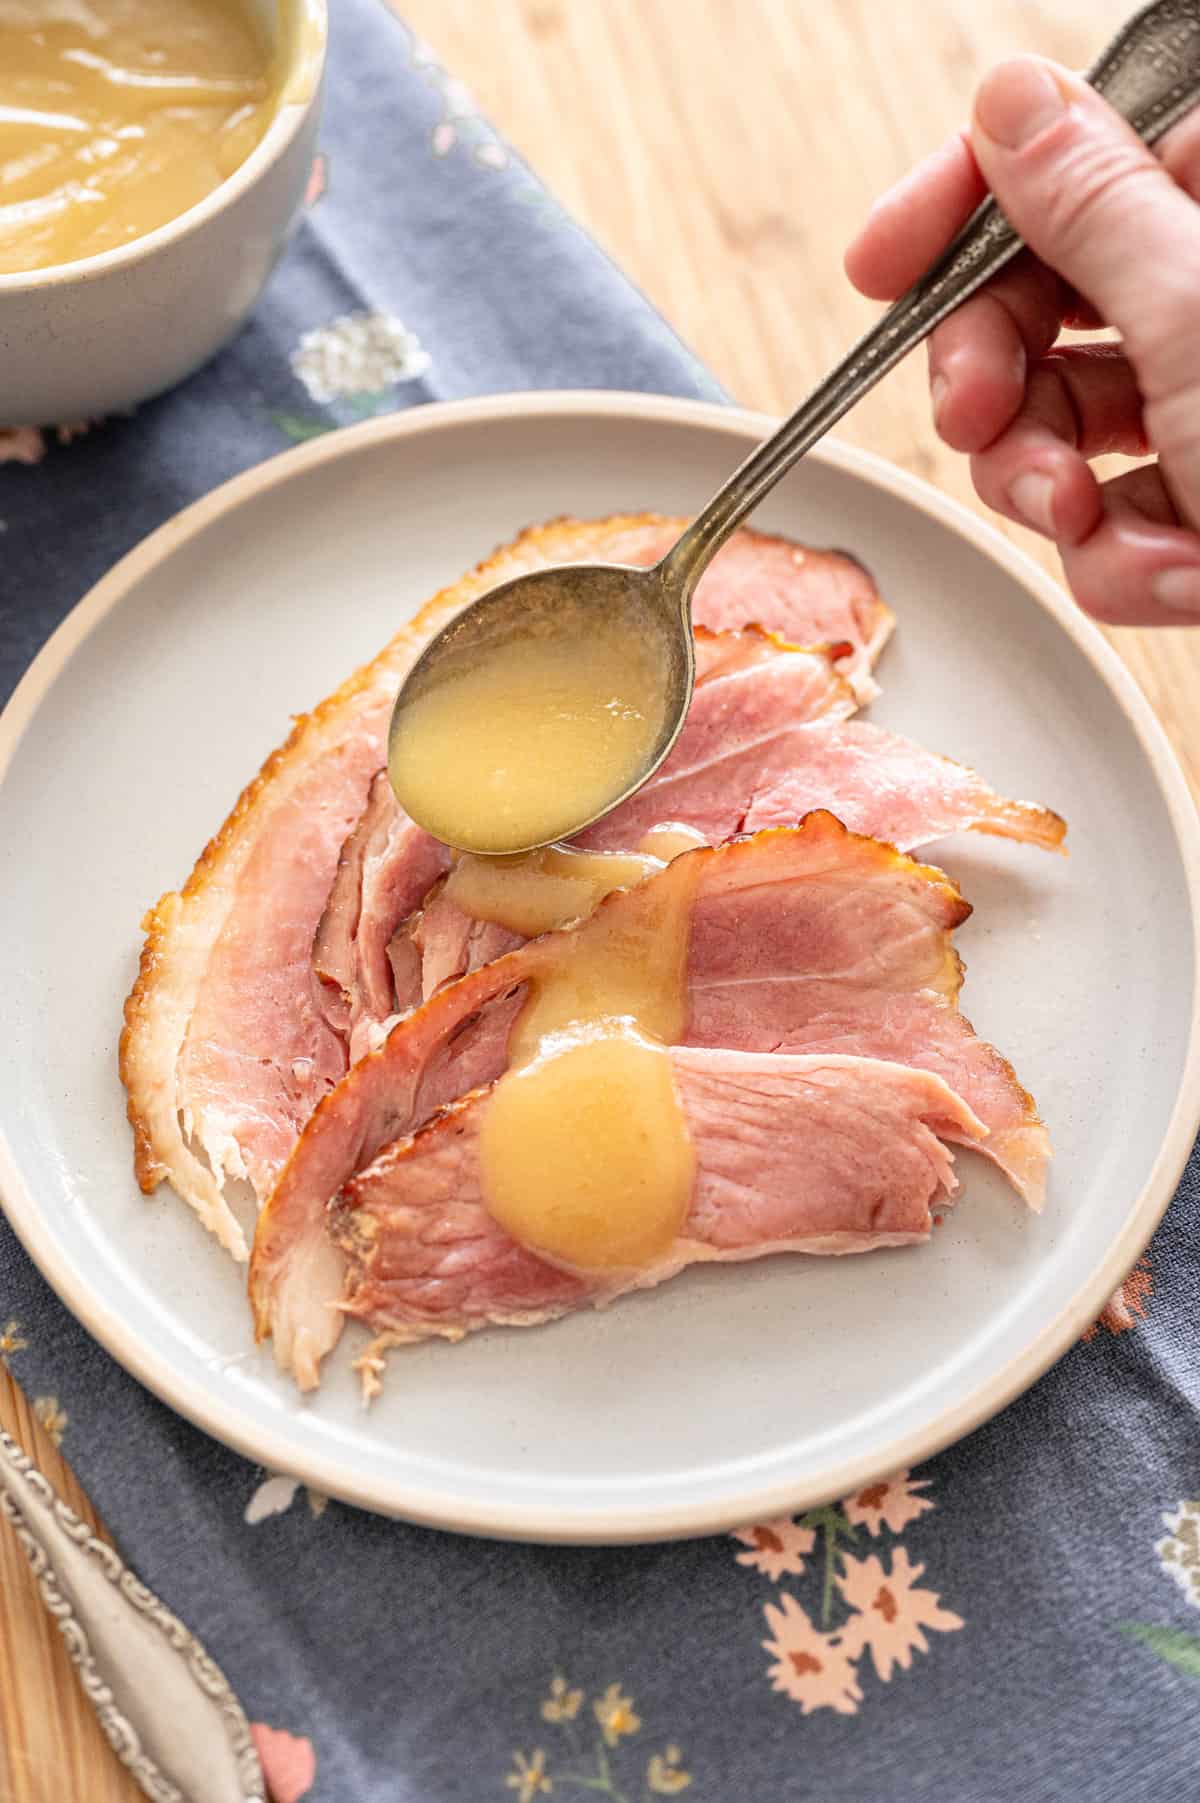 Spiral sliced ham with pineapple sauce drizzled over it on a plate.